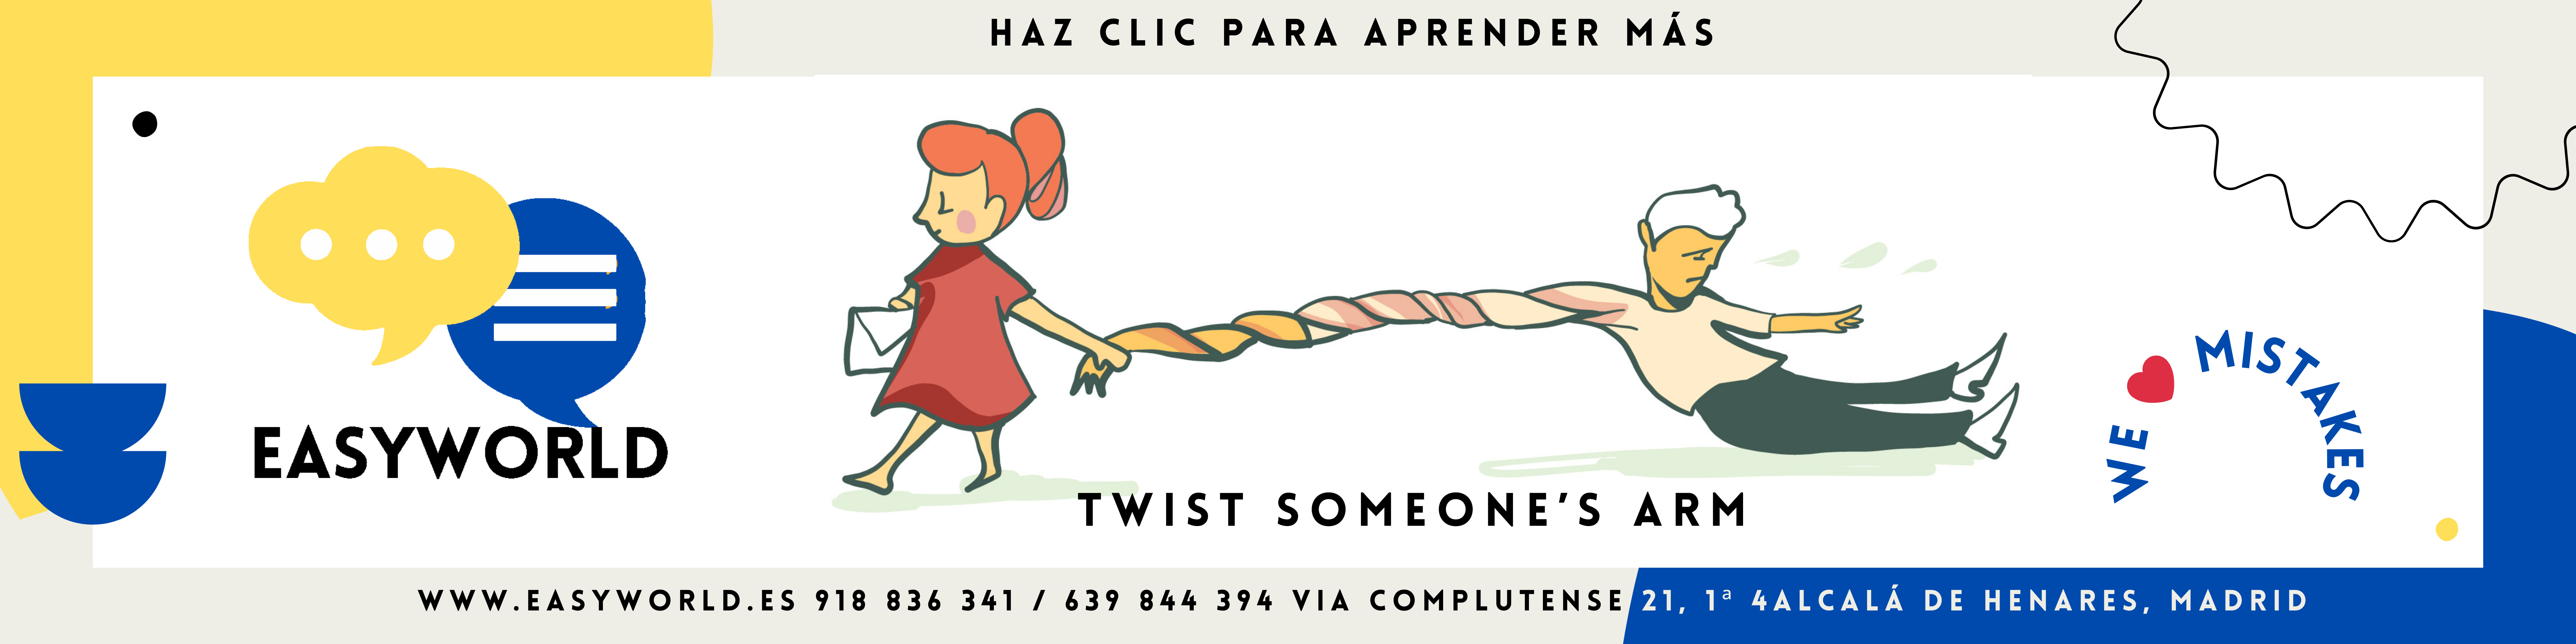 Common Idiom or expression in English "to twist someone's arm"